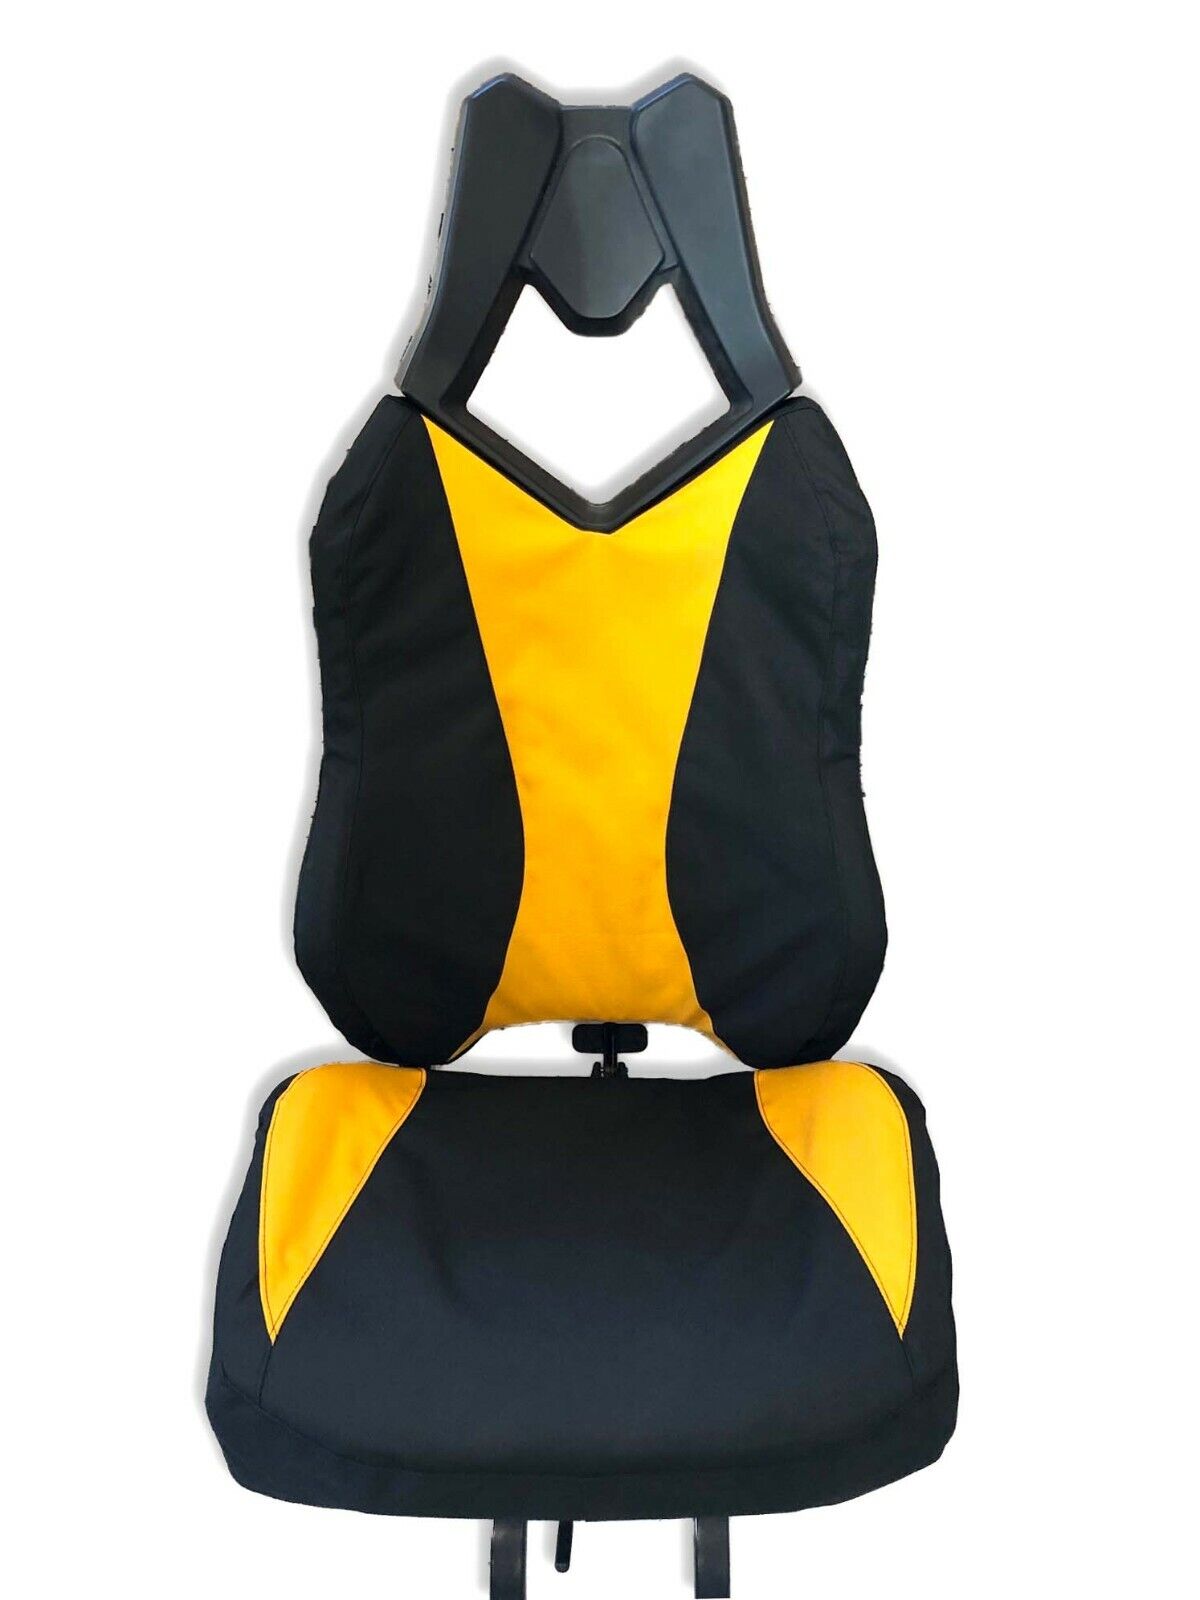 New Single Seat Cover Fits OG Can Am Commander, Made in USA  8 colors In-stock